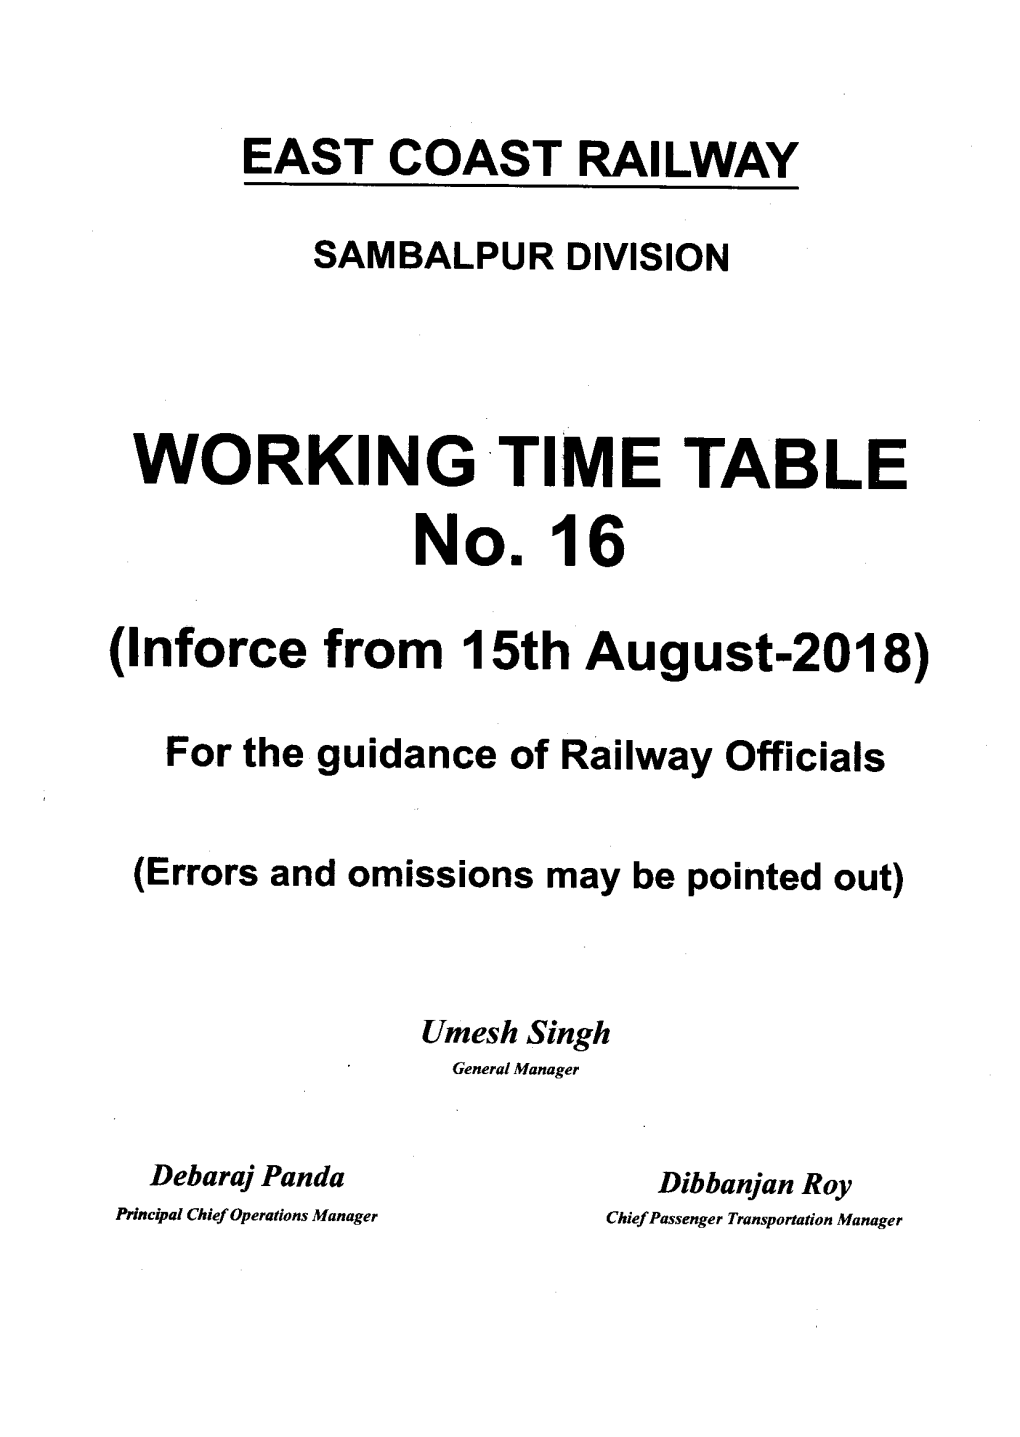 WORKING TIME TABLE No. 16 (Inforce from 15Th August-2018)